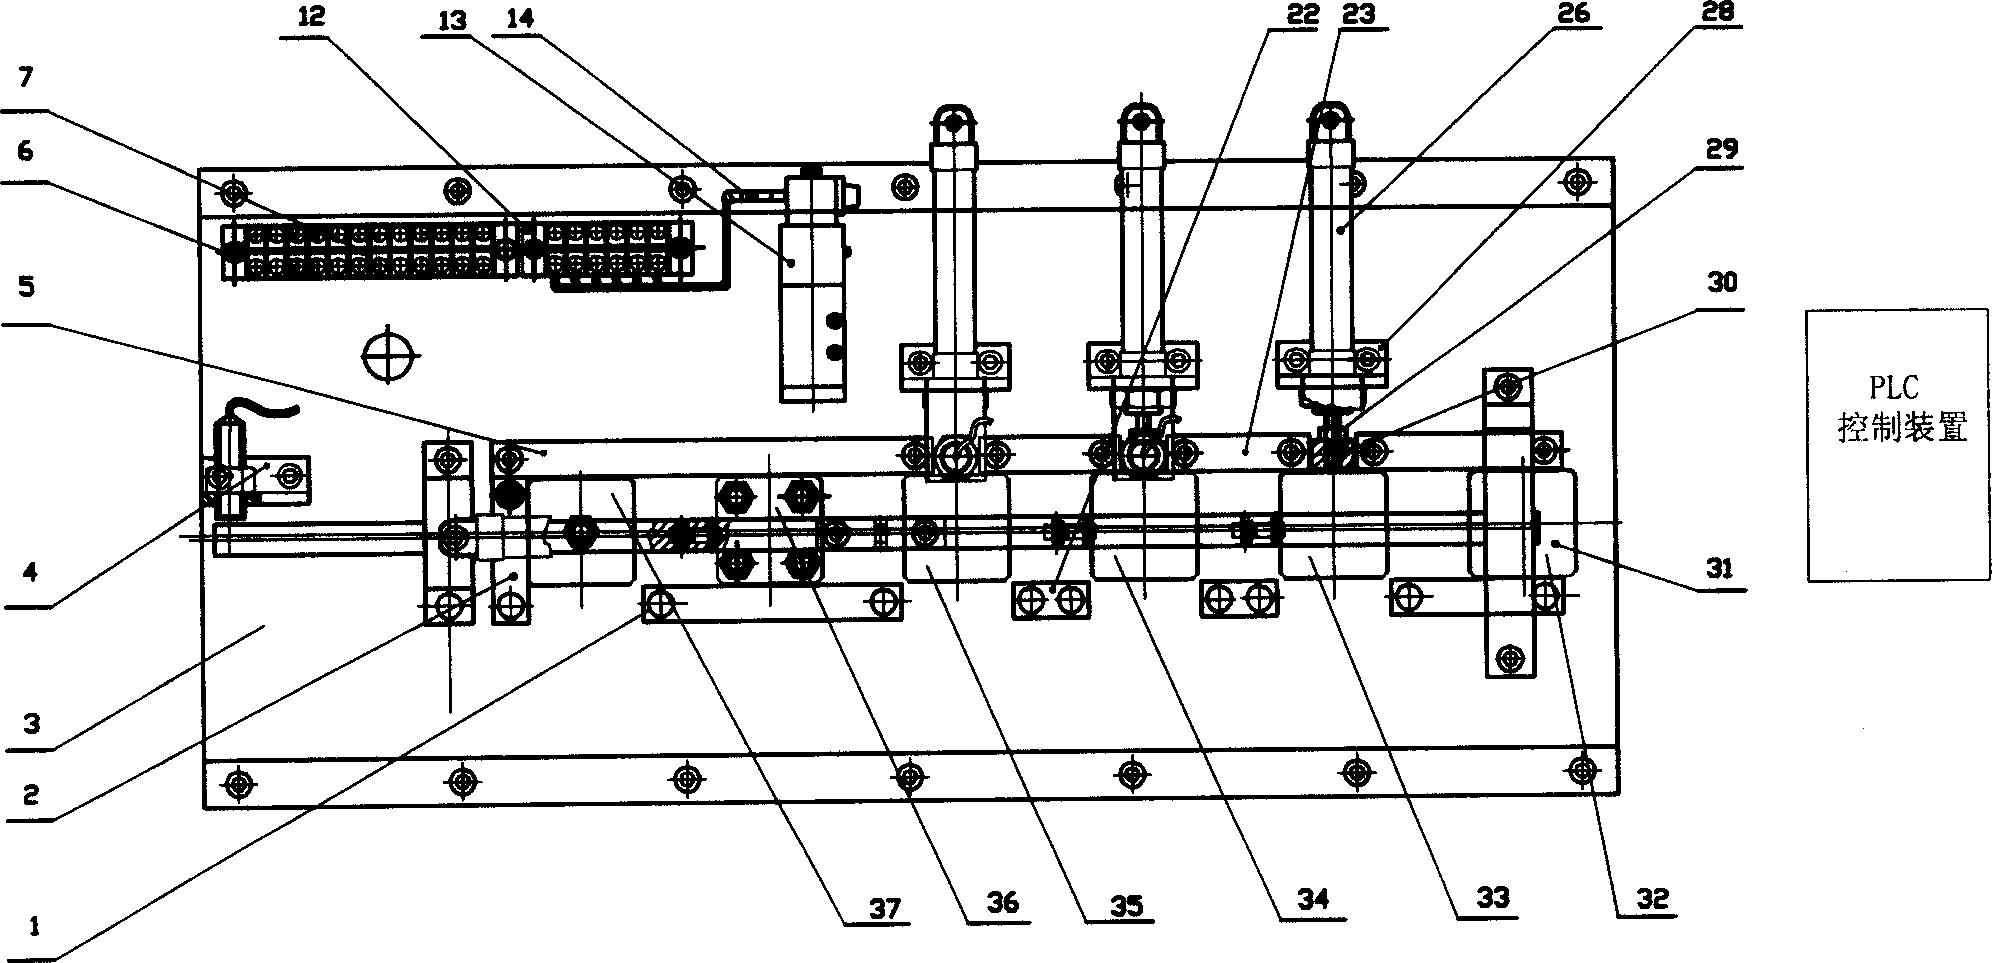 Experimental apparatus of transportation automation line capable of detection and classification